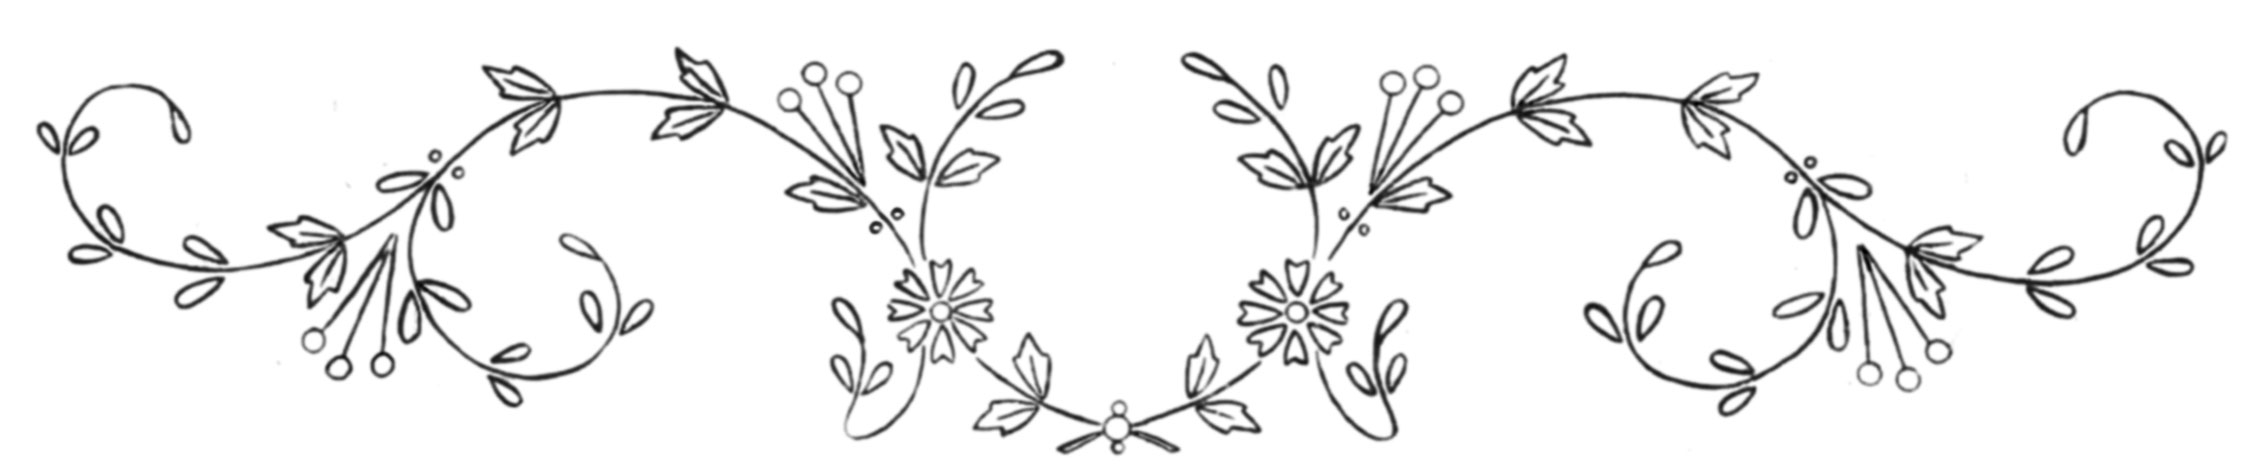 Embroidery Patterns Free Free Pattern Friday Embroidery Designs For Pillowcases Q Is For